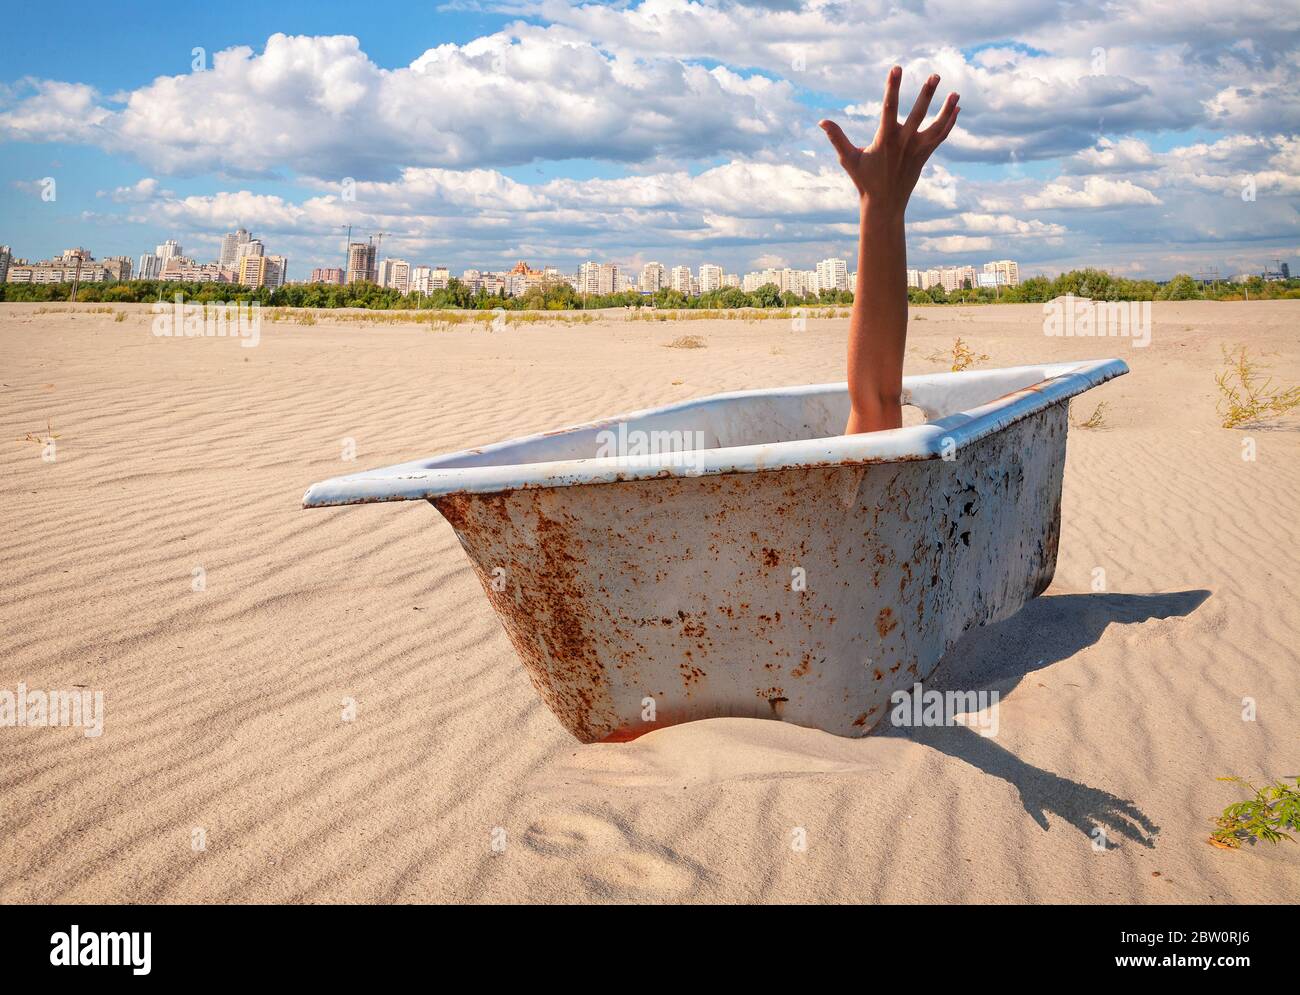 Obsolete cast iron bathtub with lifted to sky a hand in distancing outside city in desert sandy area.Concept of self isolation, quarantine Stock Photo